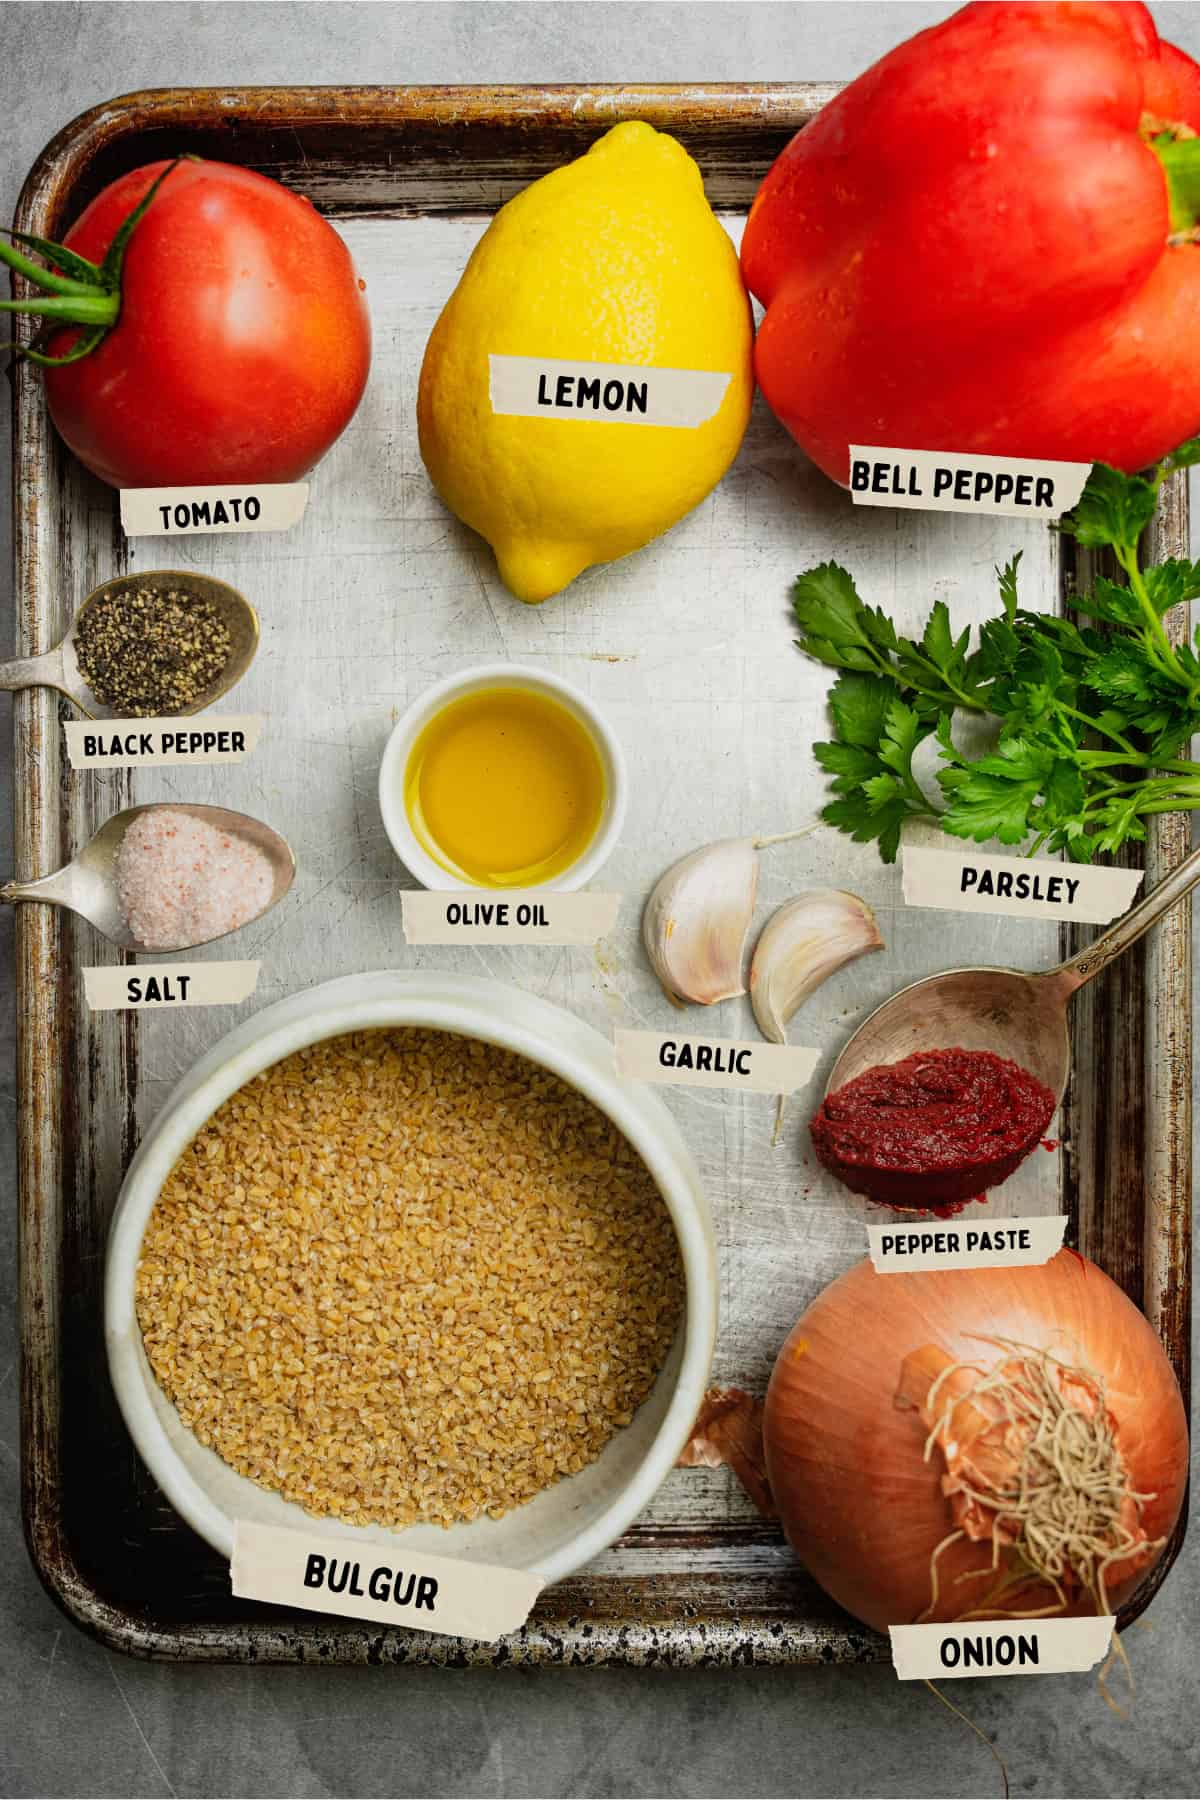 Bulgur Pilavi Ingredients are laid out and labeled on a scratched metal tray.